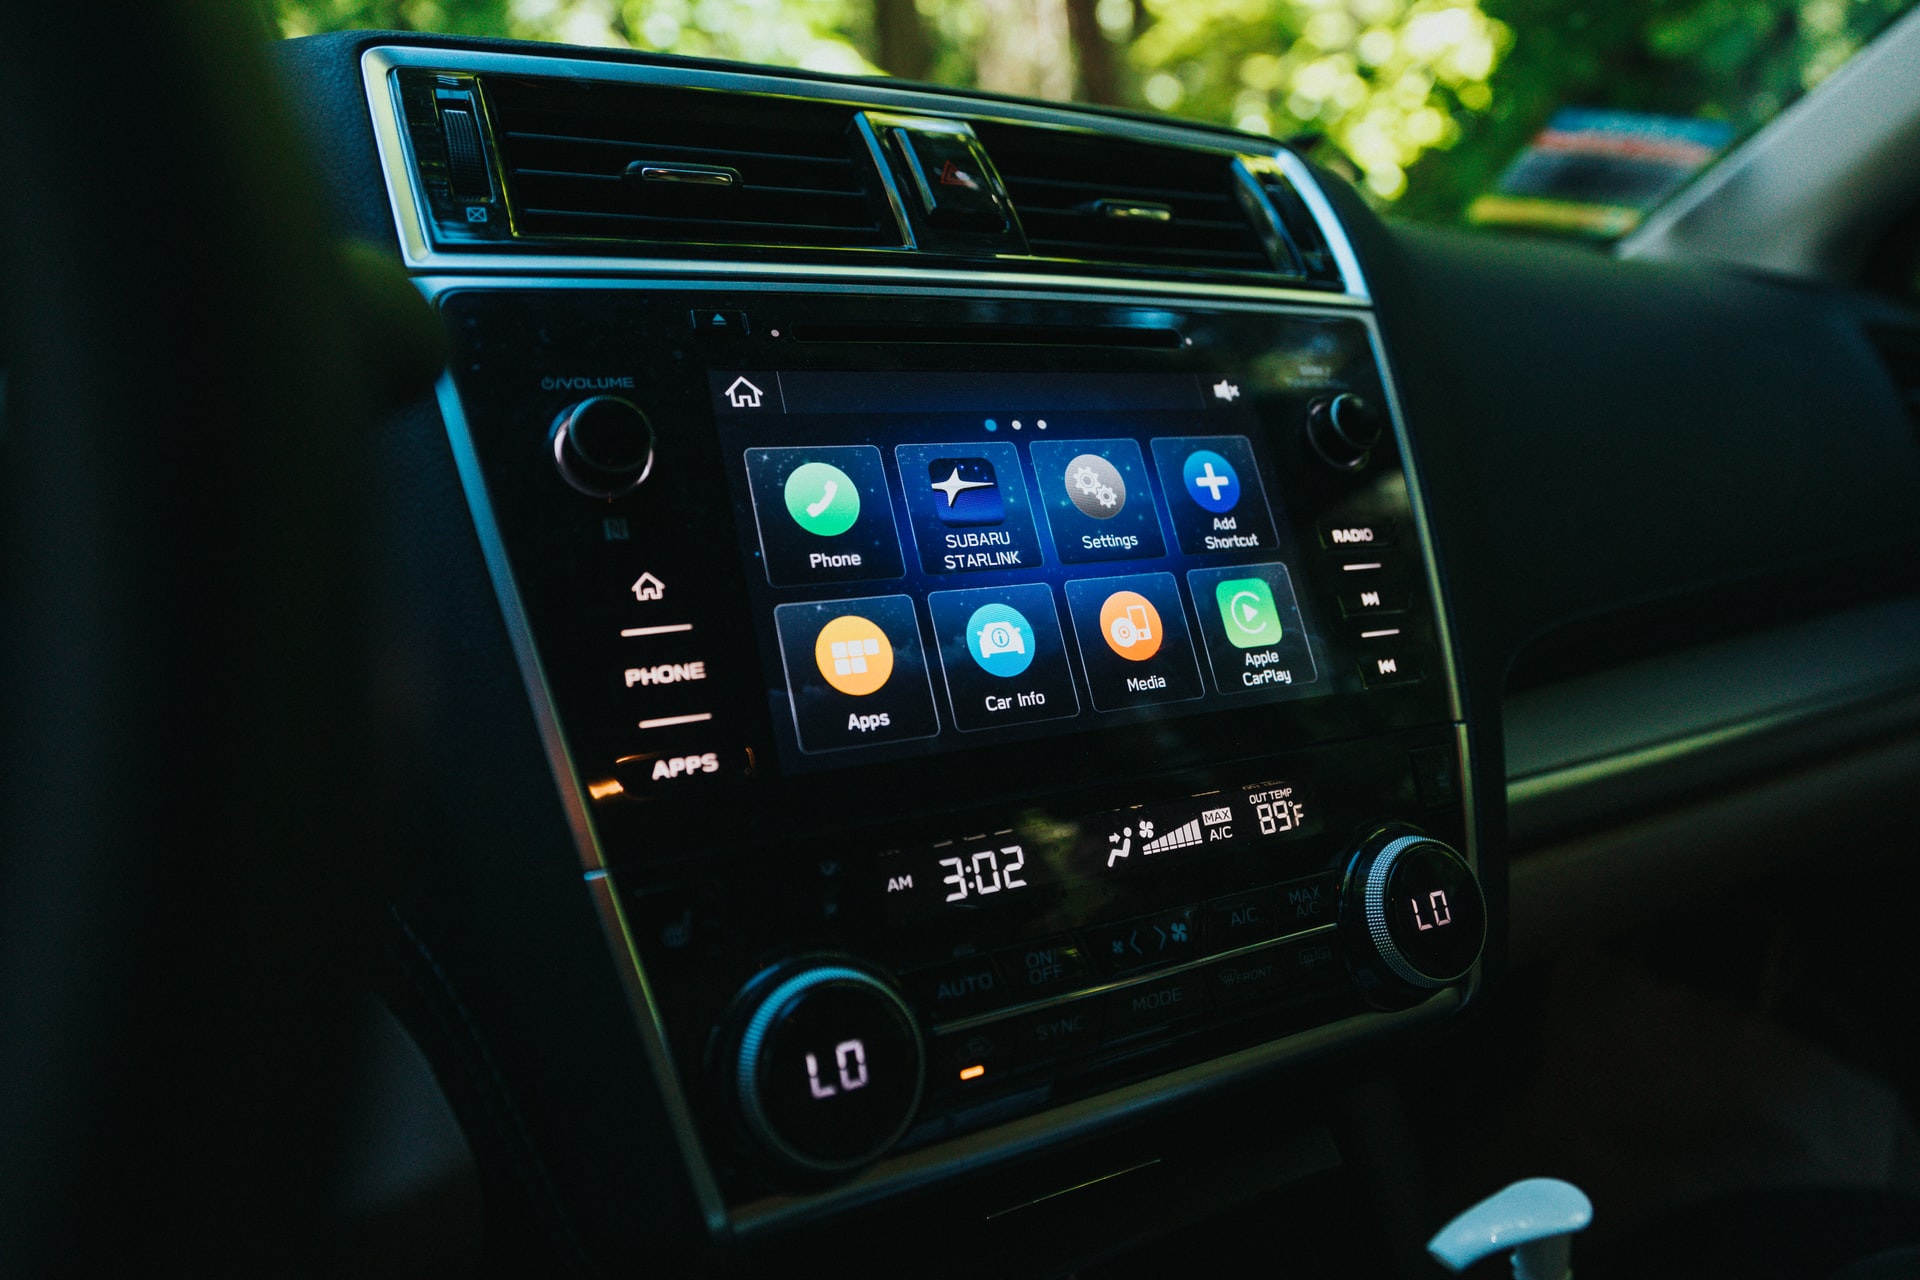 Single DIN VS Double DIN: Differences, Pros & Cons